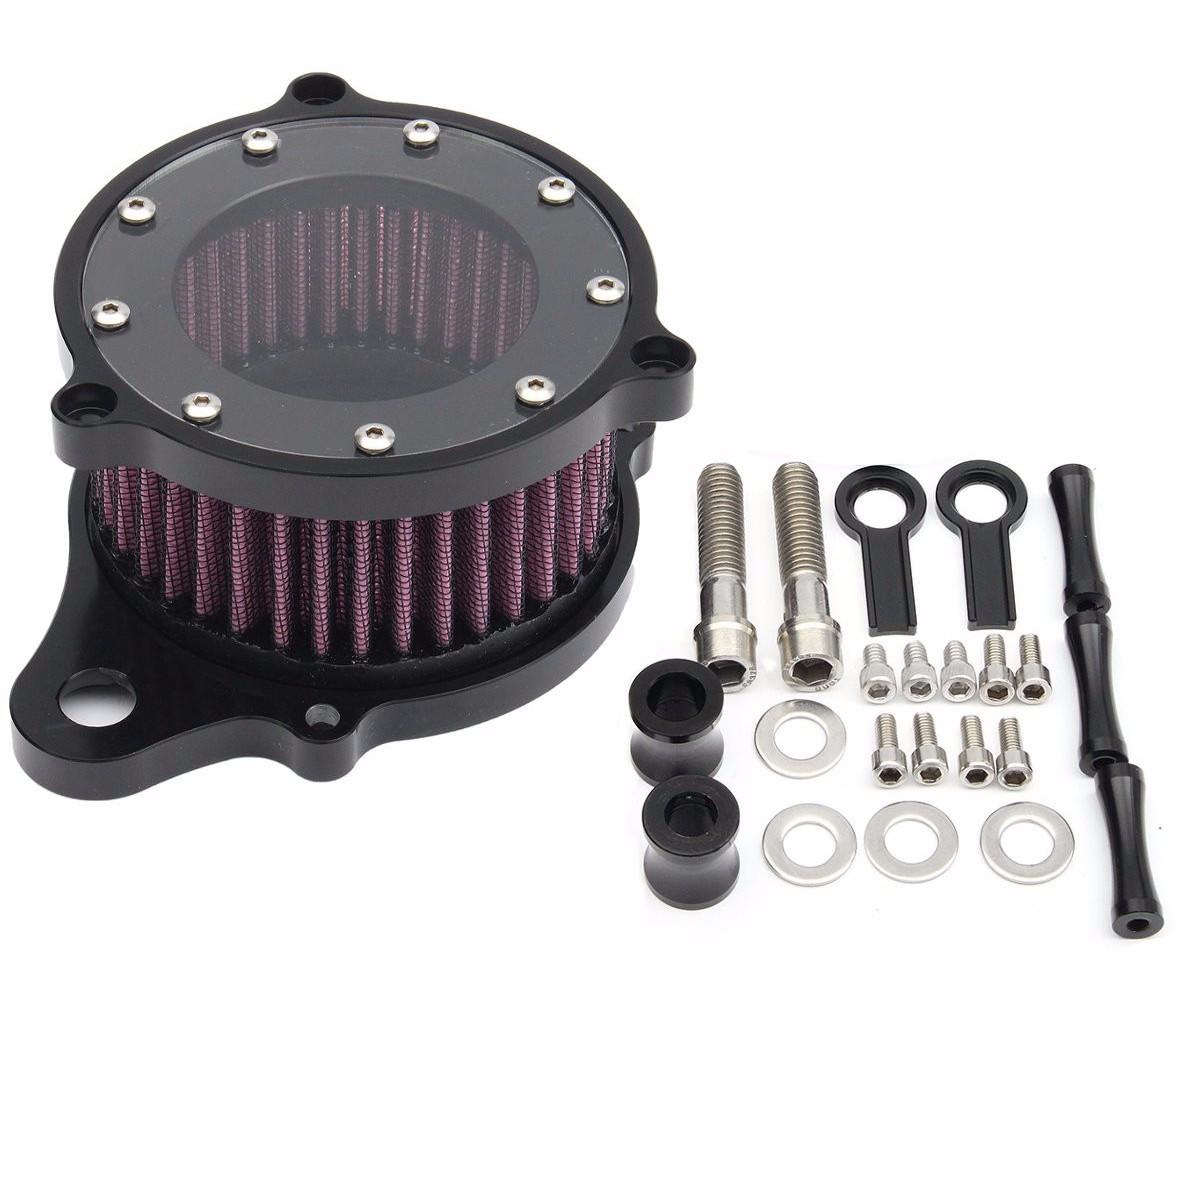 Image of Motorcycle Air Cleaner Intake Filter System Aluminum For Harley-Davidson Sports XL 883 1200 2004 2005 2006 2007 2008 200